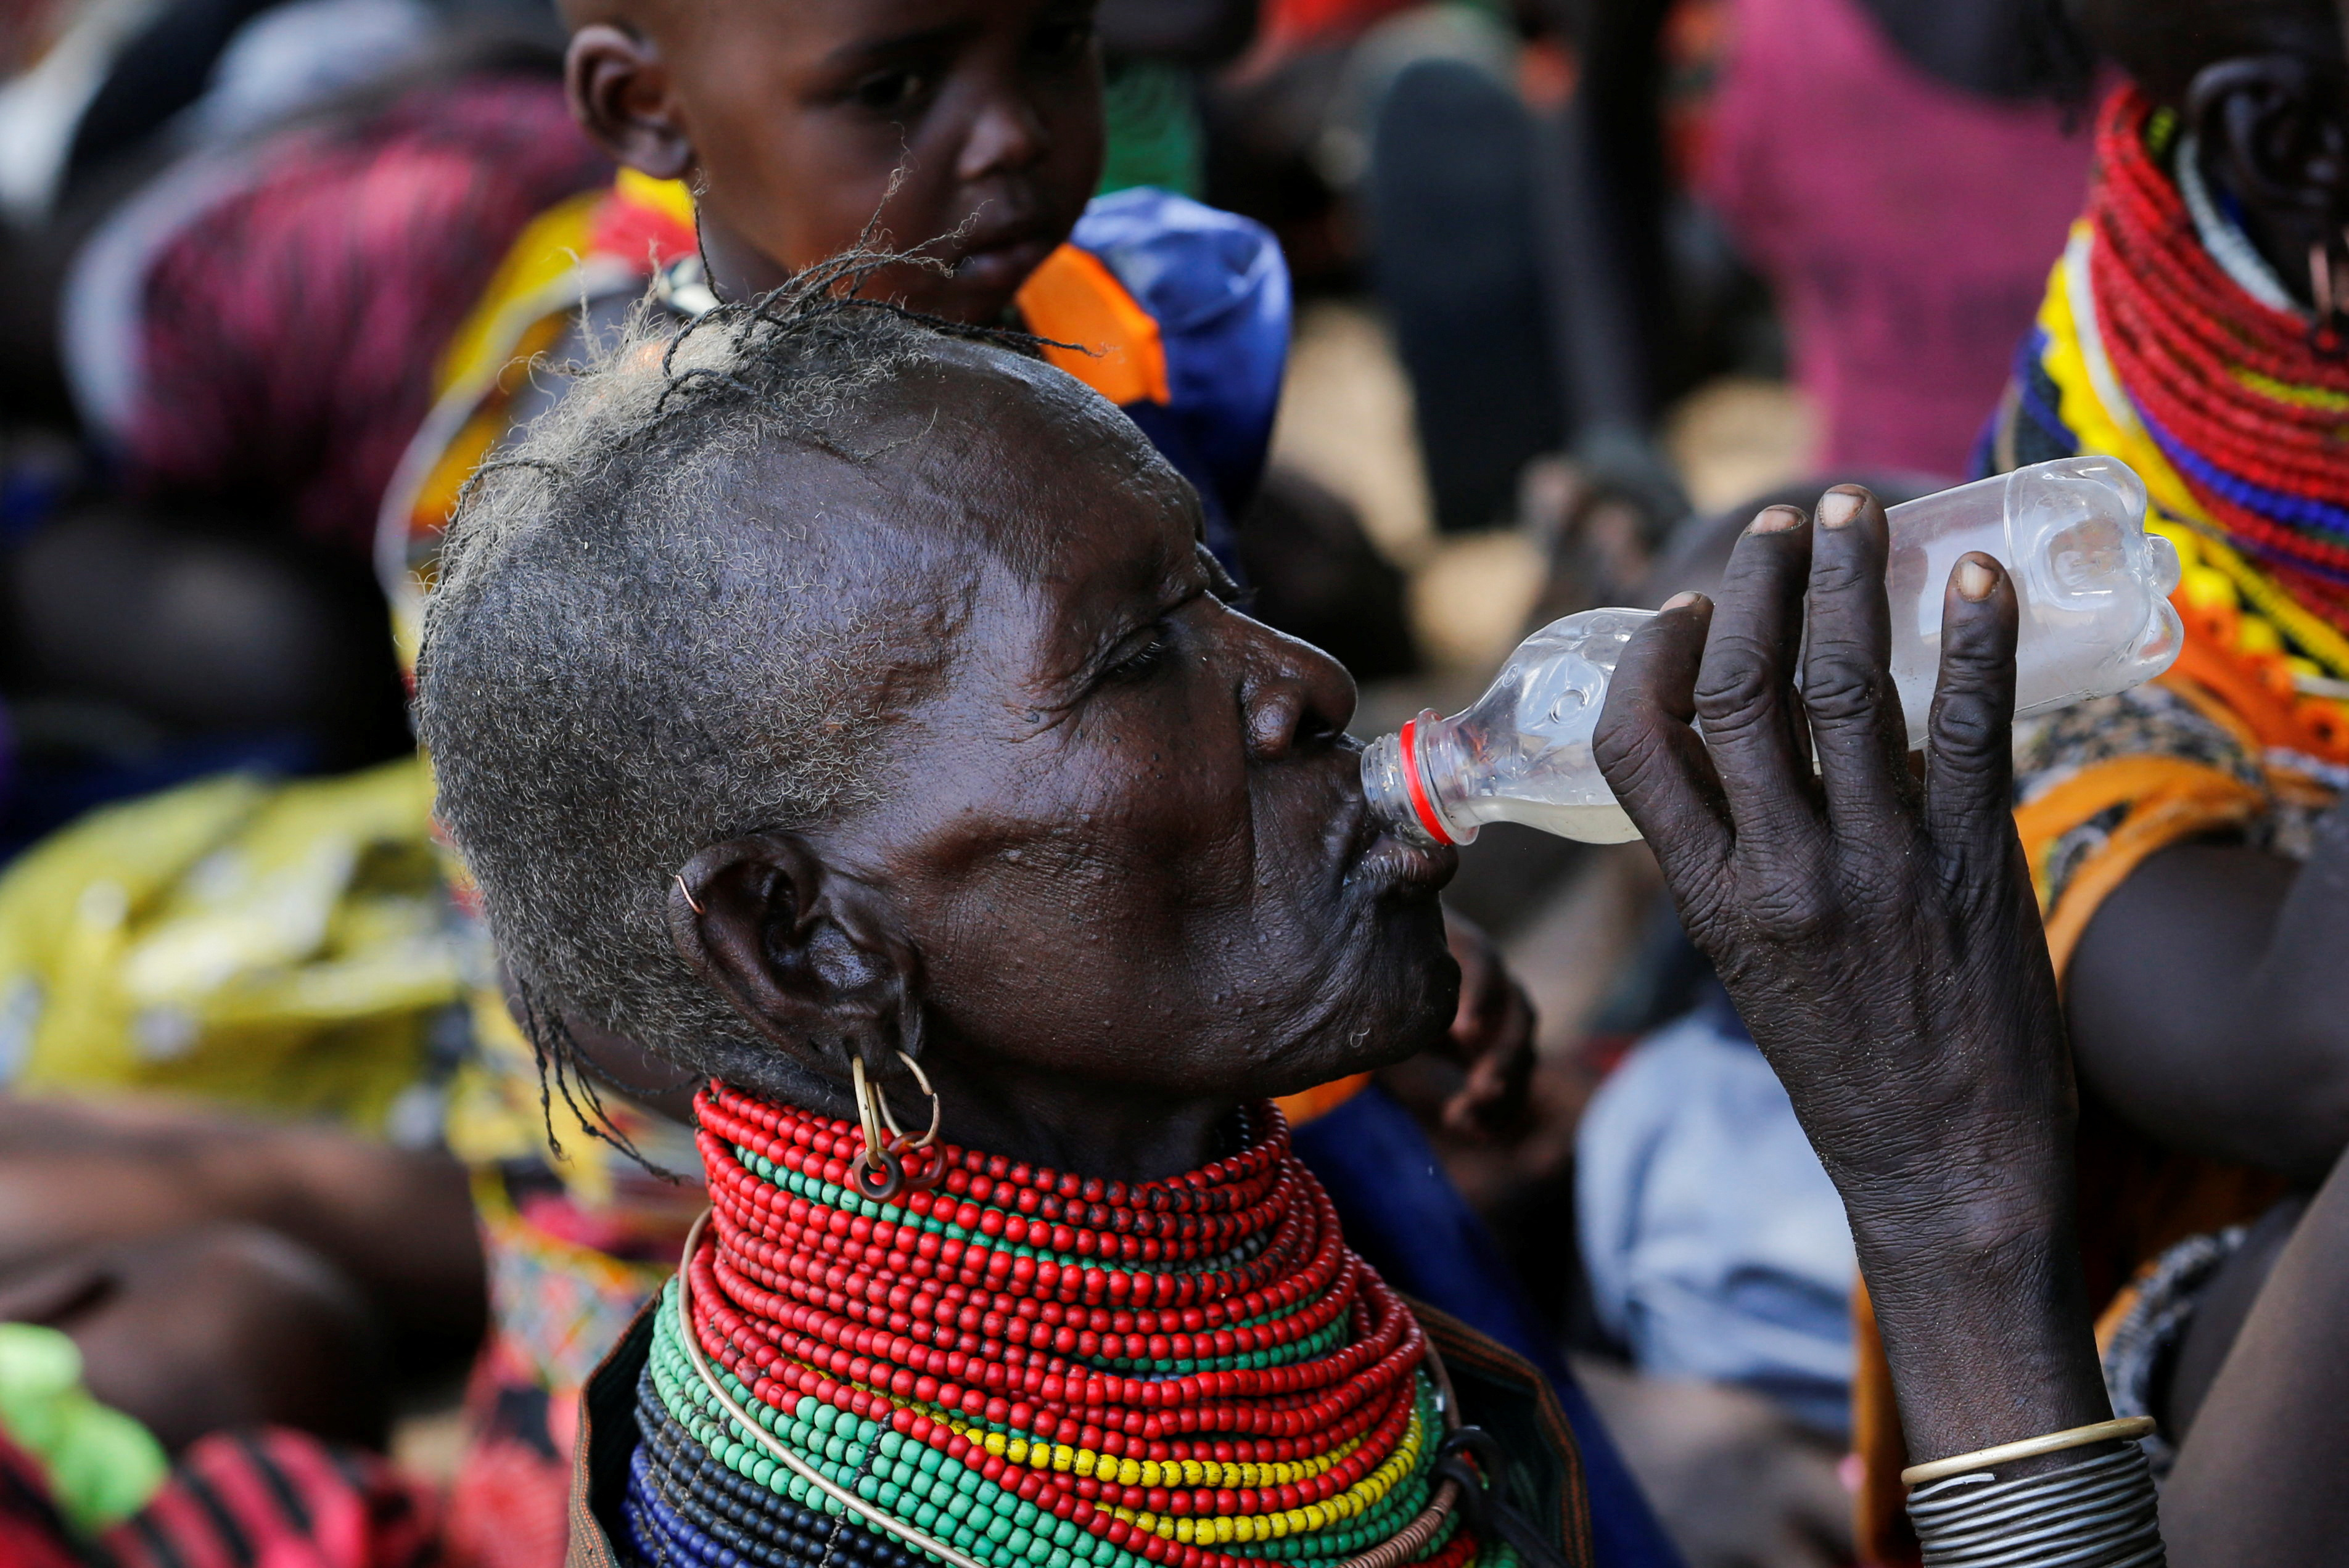 A woman from the Turkana pastoralist community affected by the worsening drought due to failed rain seasons, drinks water as she attends an integrated outreach medical clinic in Kakimat village in Turkana